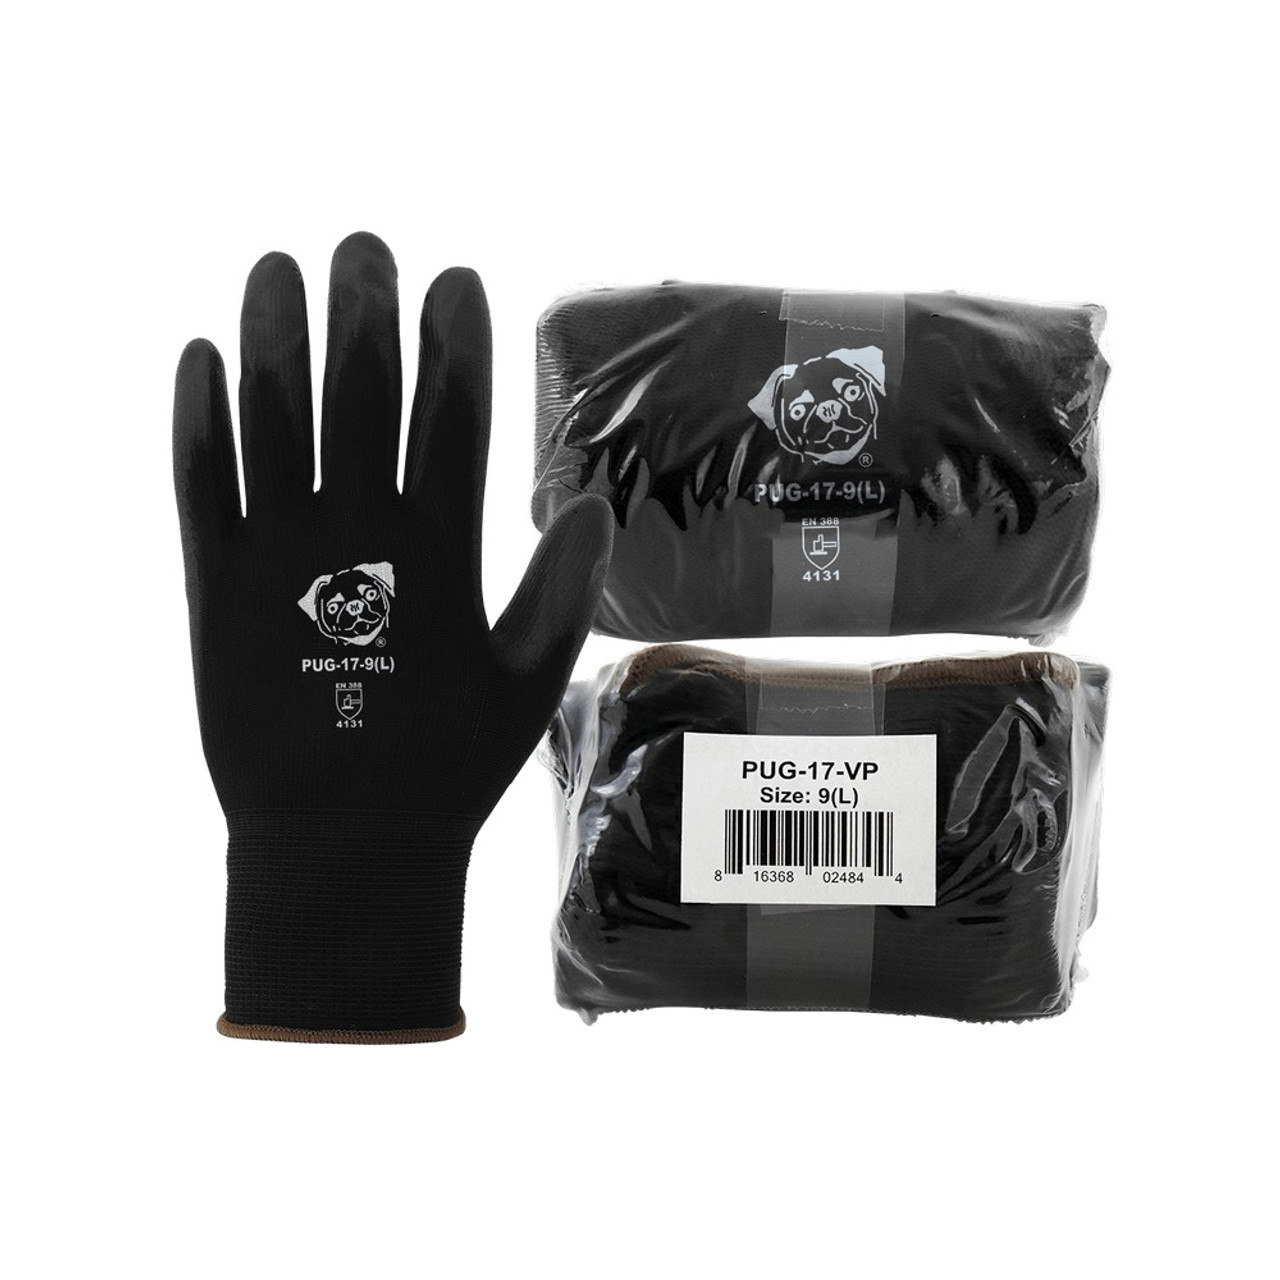 Global Glove PUG-17 Lightweight Polyurethane Dipped Work Gloves,  Anti-Static/Electrostatic Compliant with Secure Grip, Bare Hand  Sensitivity, Black